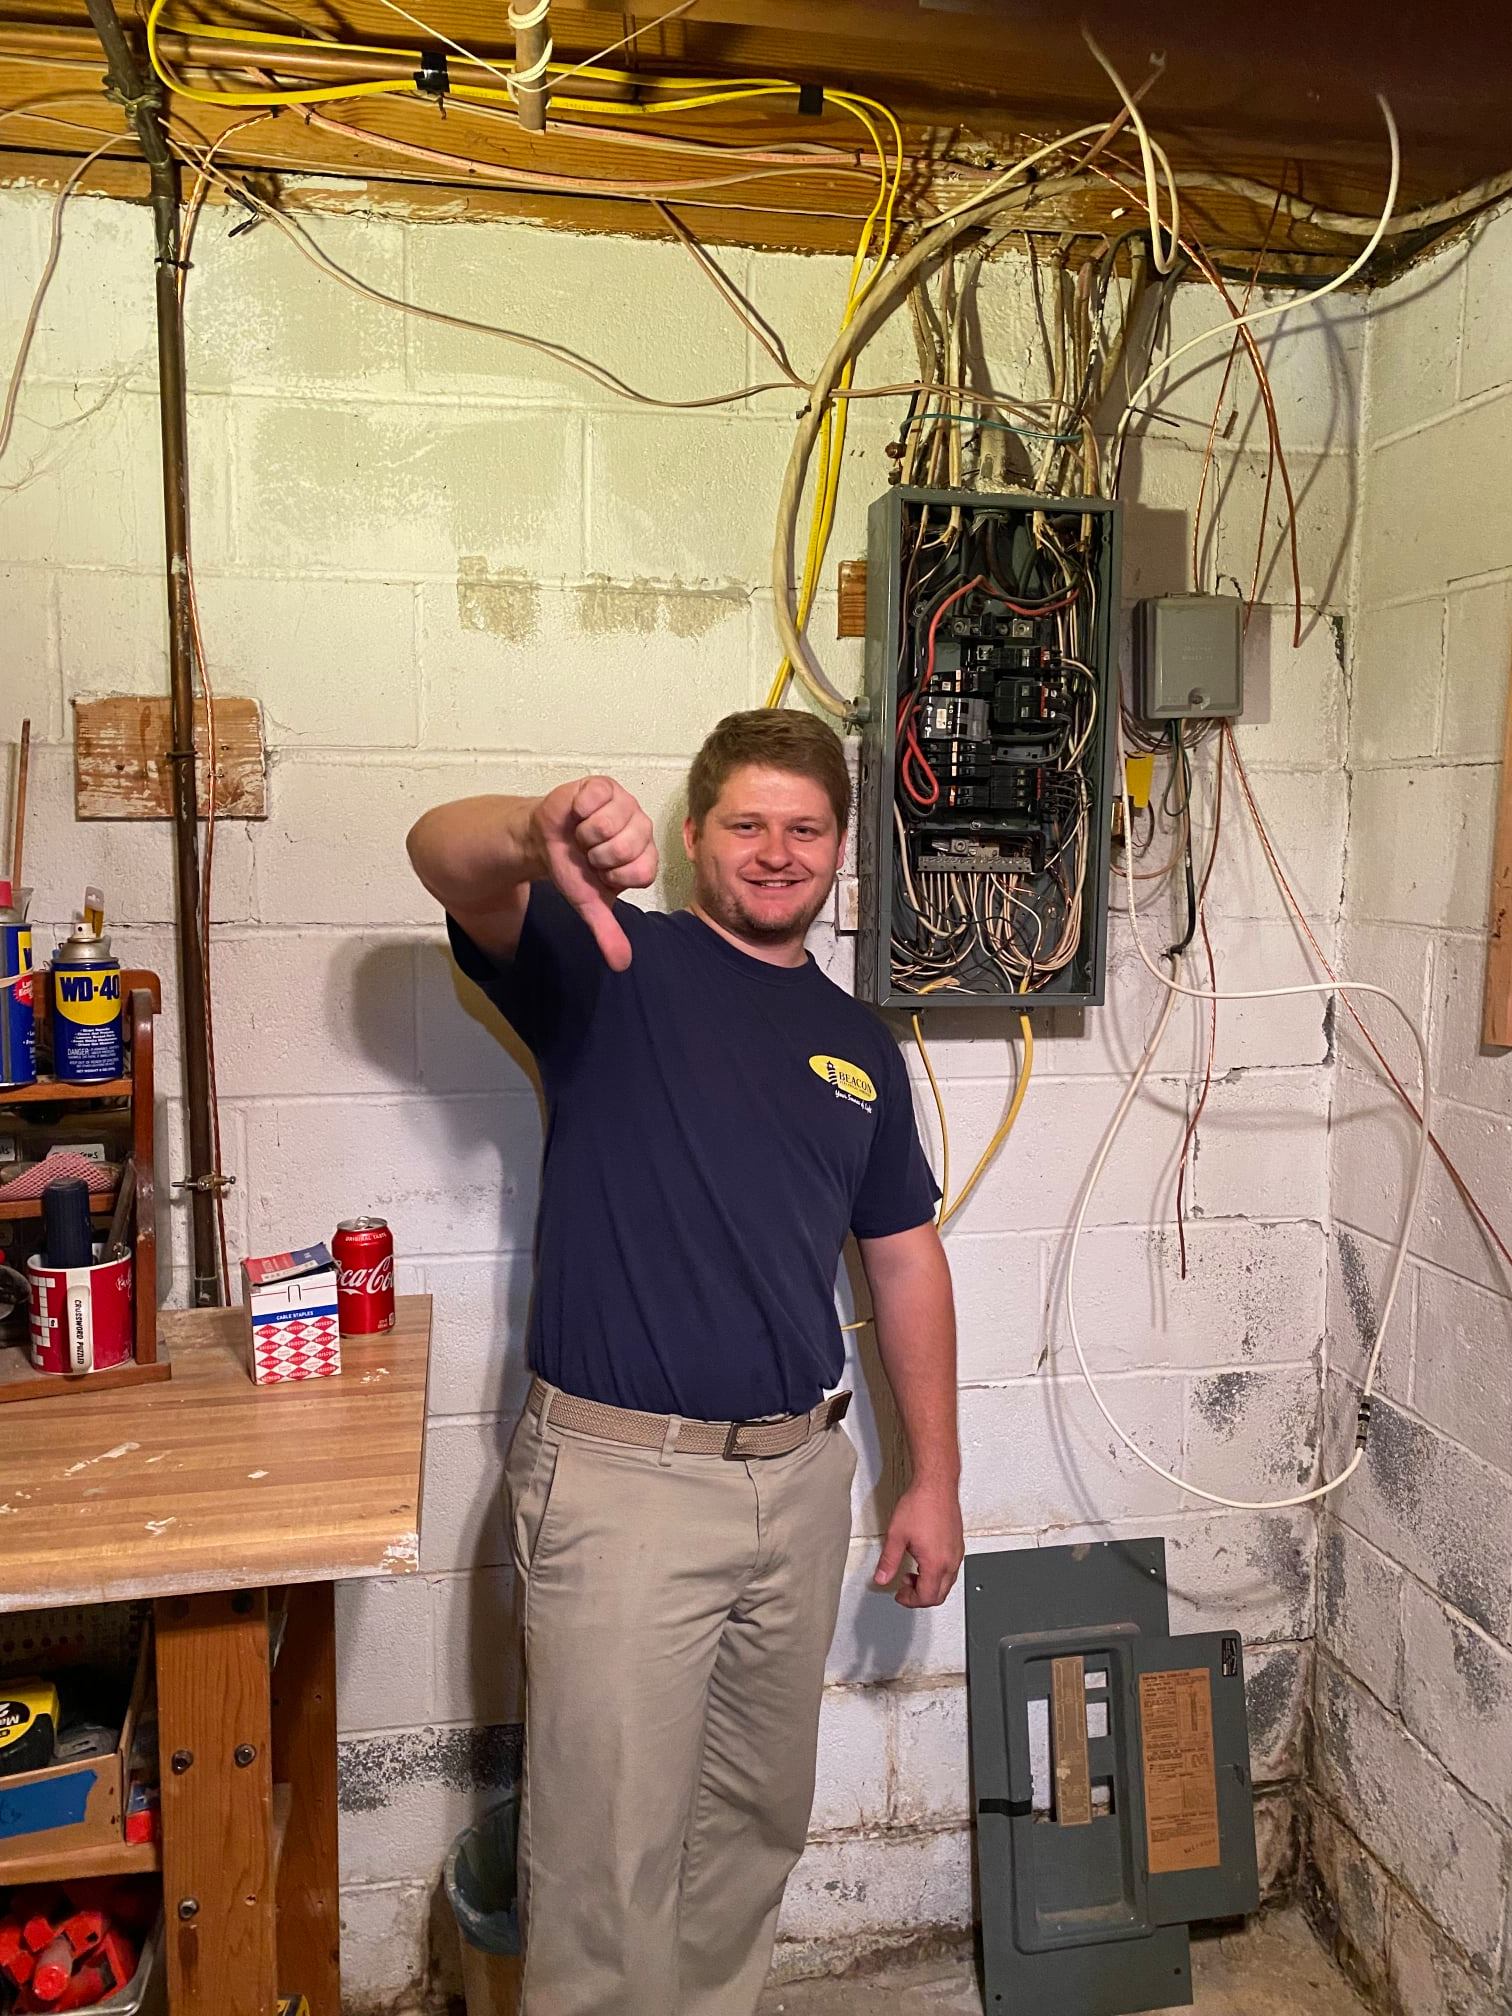 technician giving a thumbs down in front of electrical panel